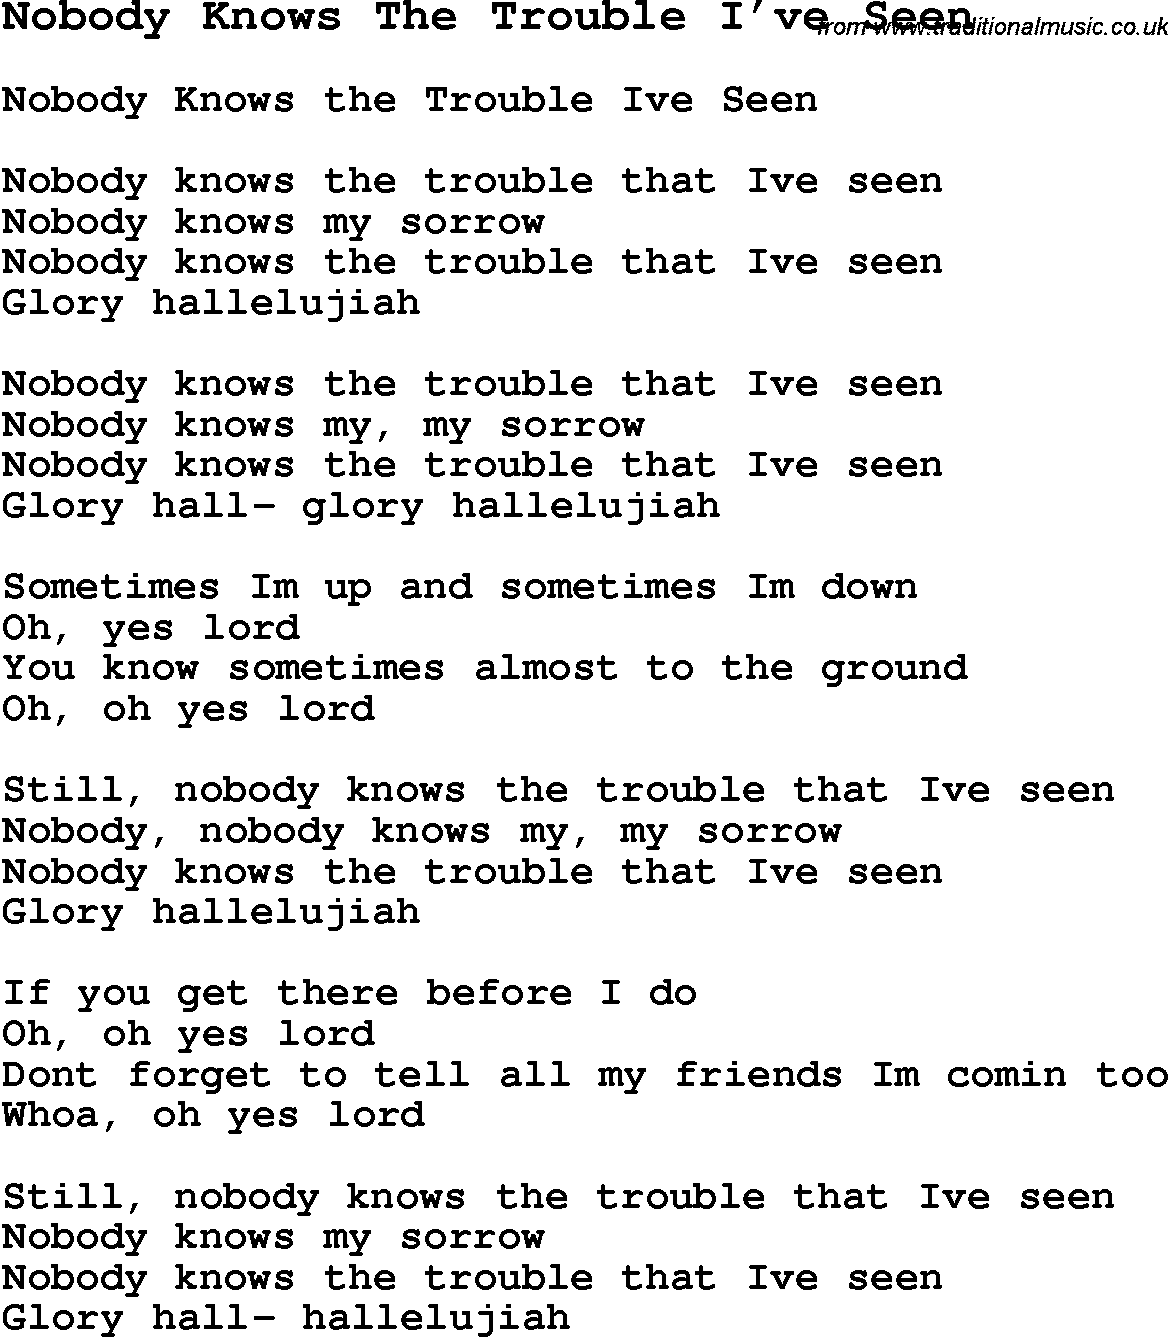 Negro Spiritual Song Lyrics for Nobody Knows The Trouble I've Seen